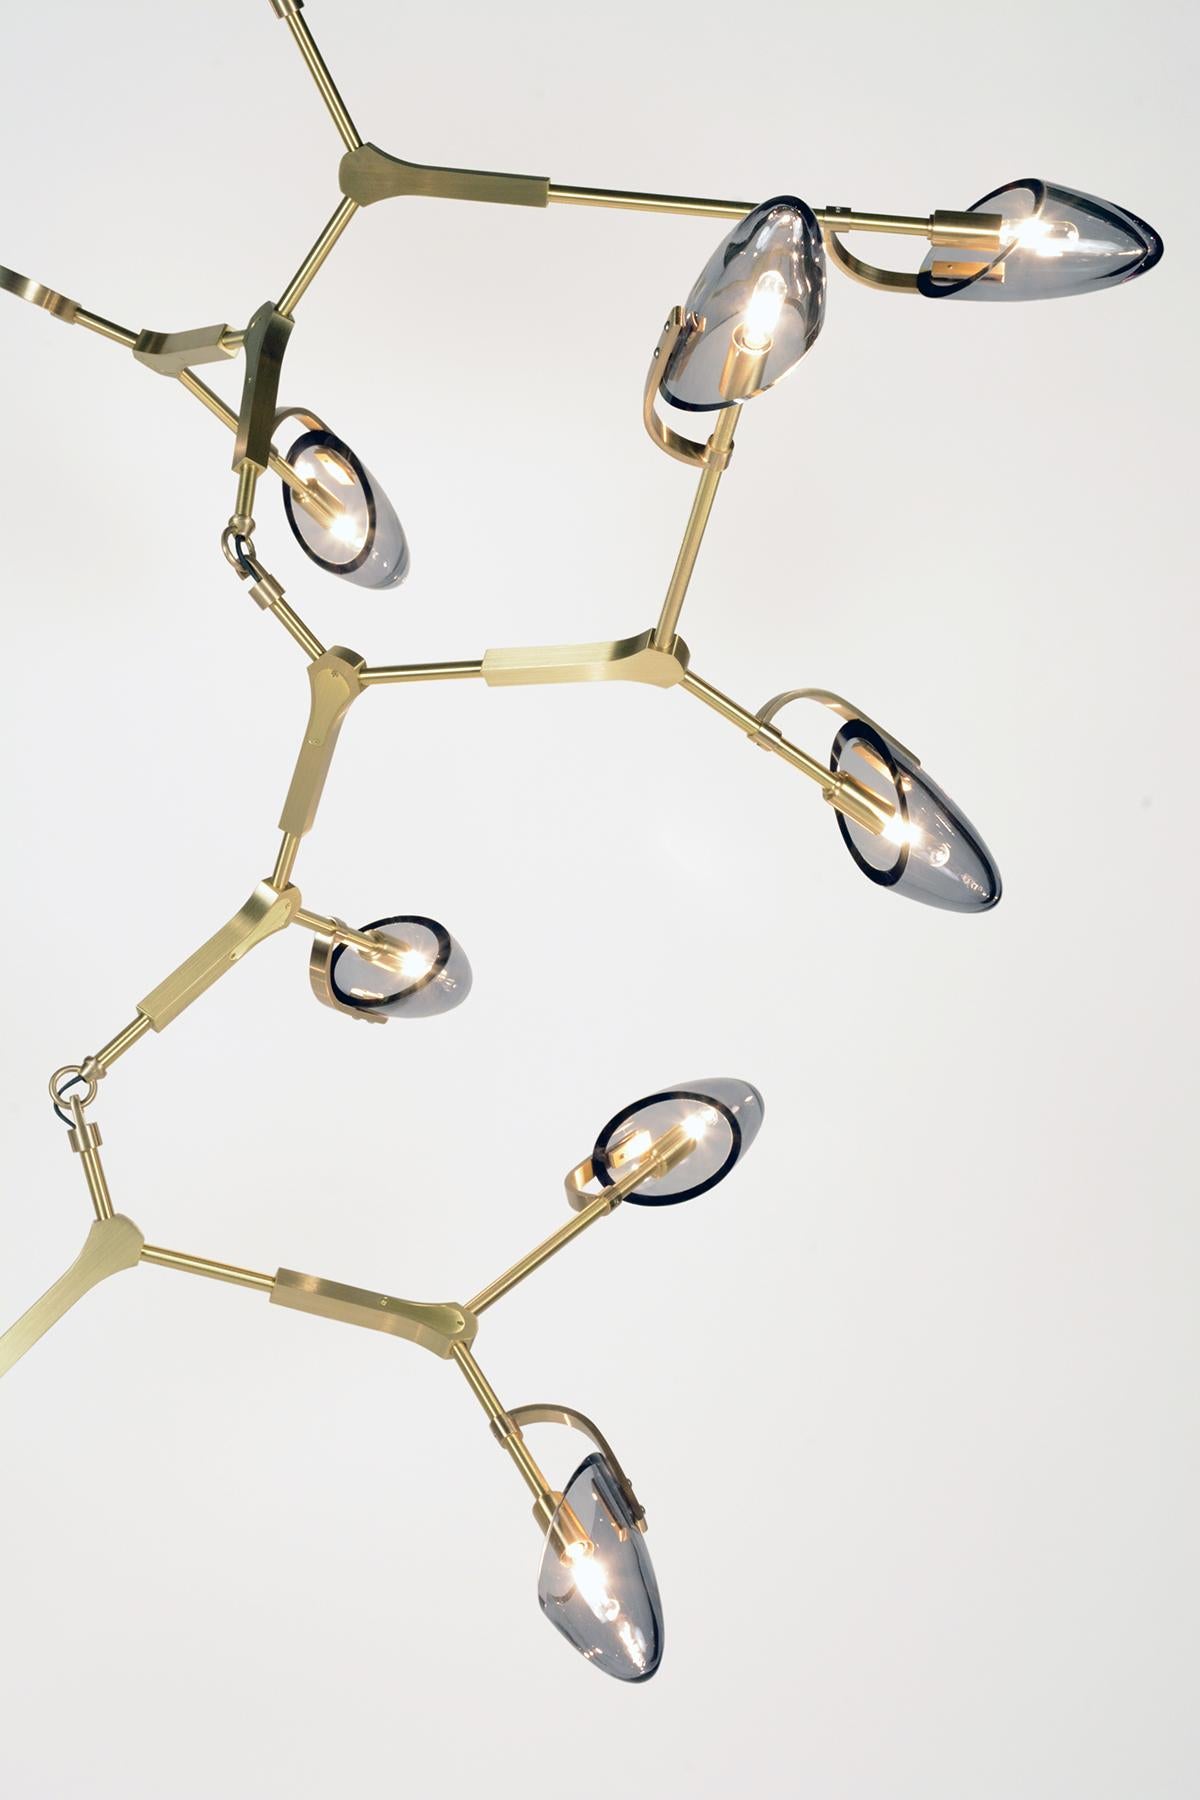 Kinesis chandelier is a modular lighting system featuring blown glass diffusers which are interconnected by solid brass components. The resulting fixture is an organic and sculptural centerpiece, which is unique from every angle. This listing